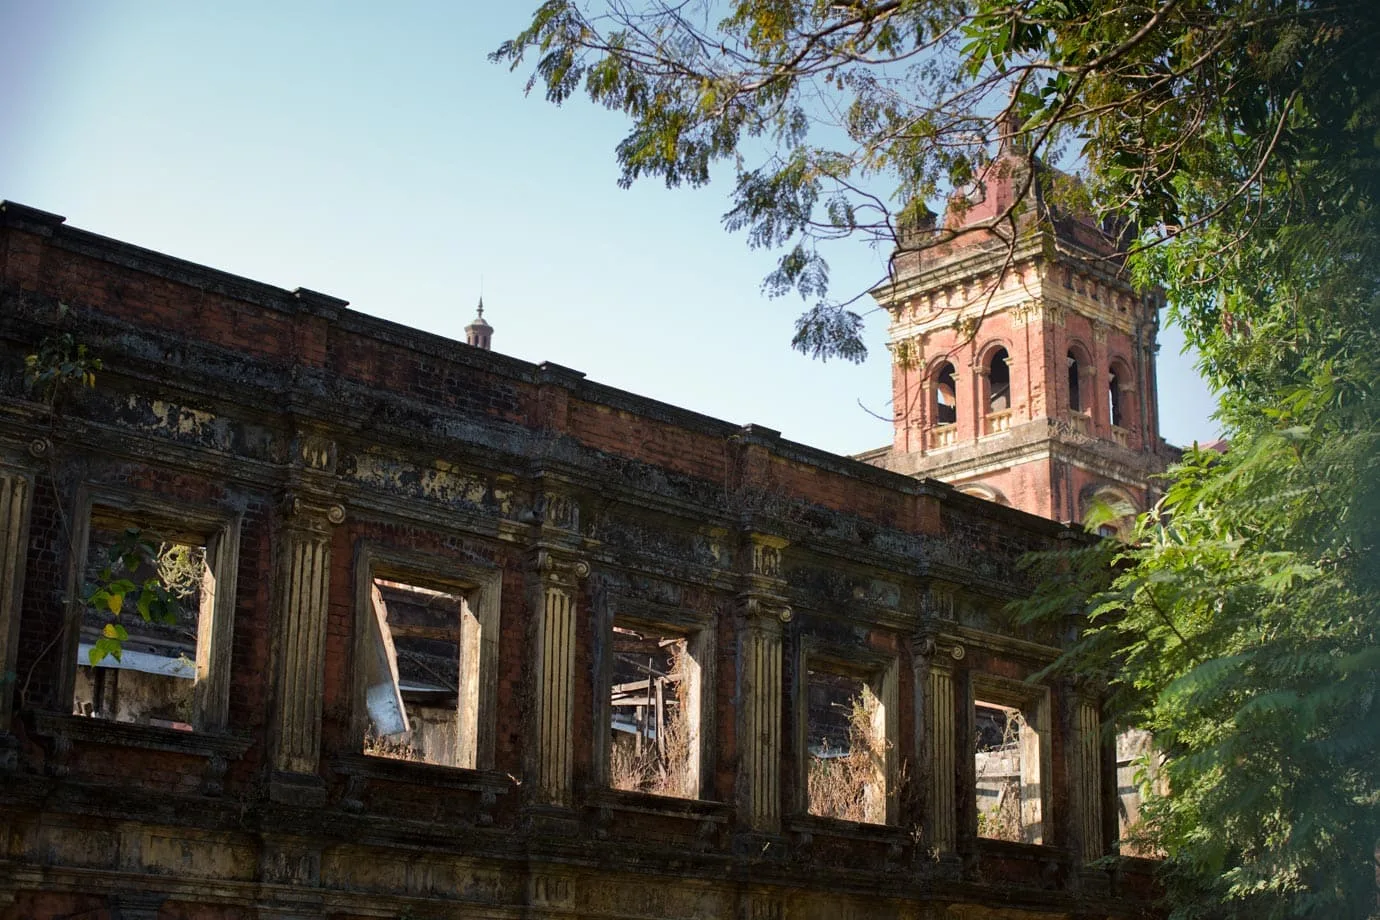 One of the crumbling structures found in Yangon - Brian Ceci